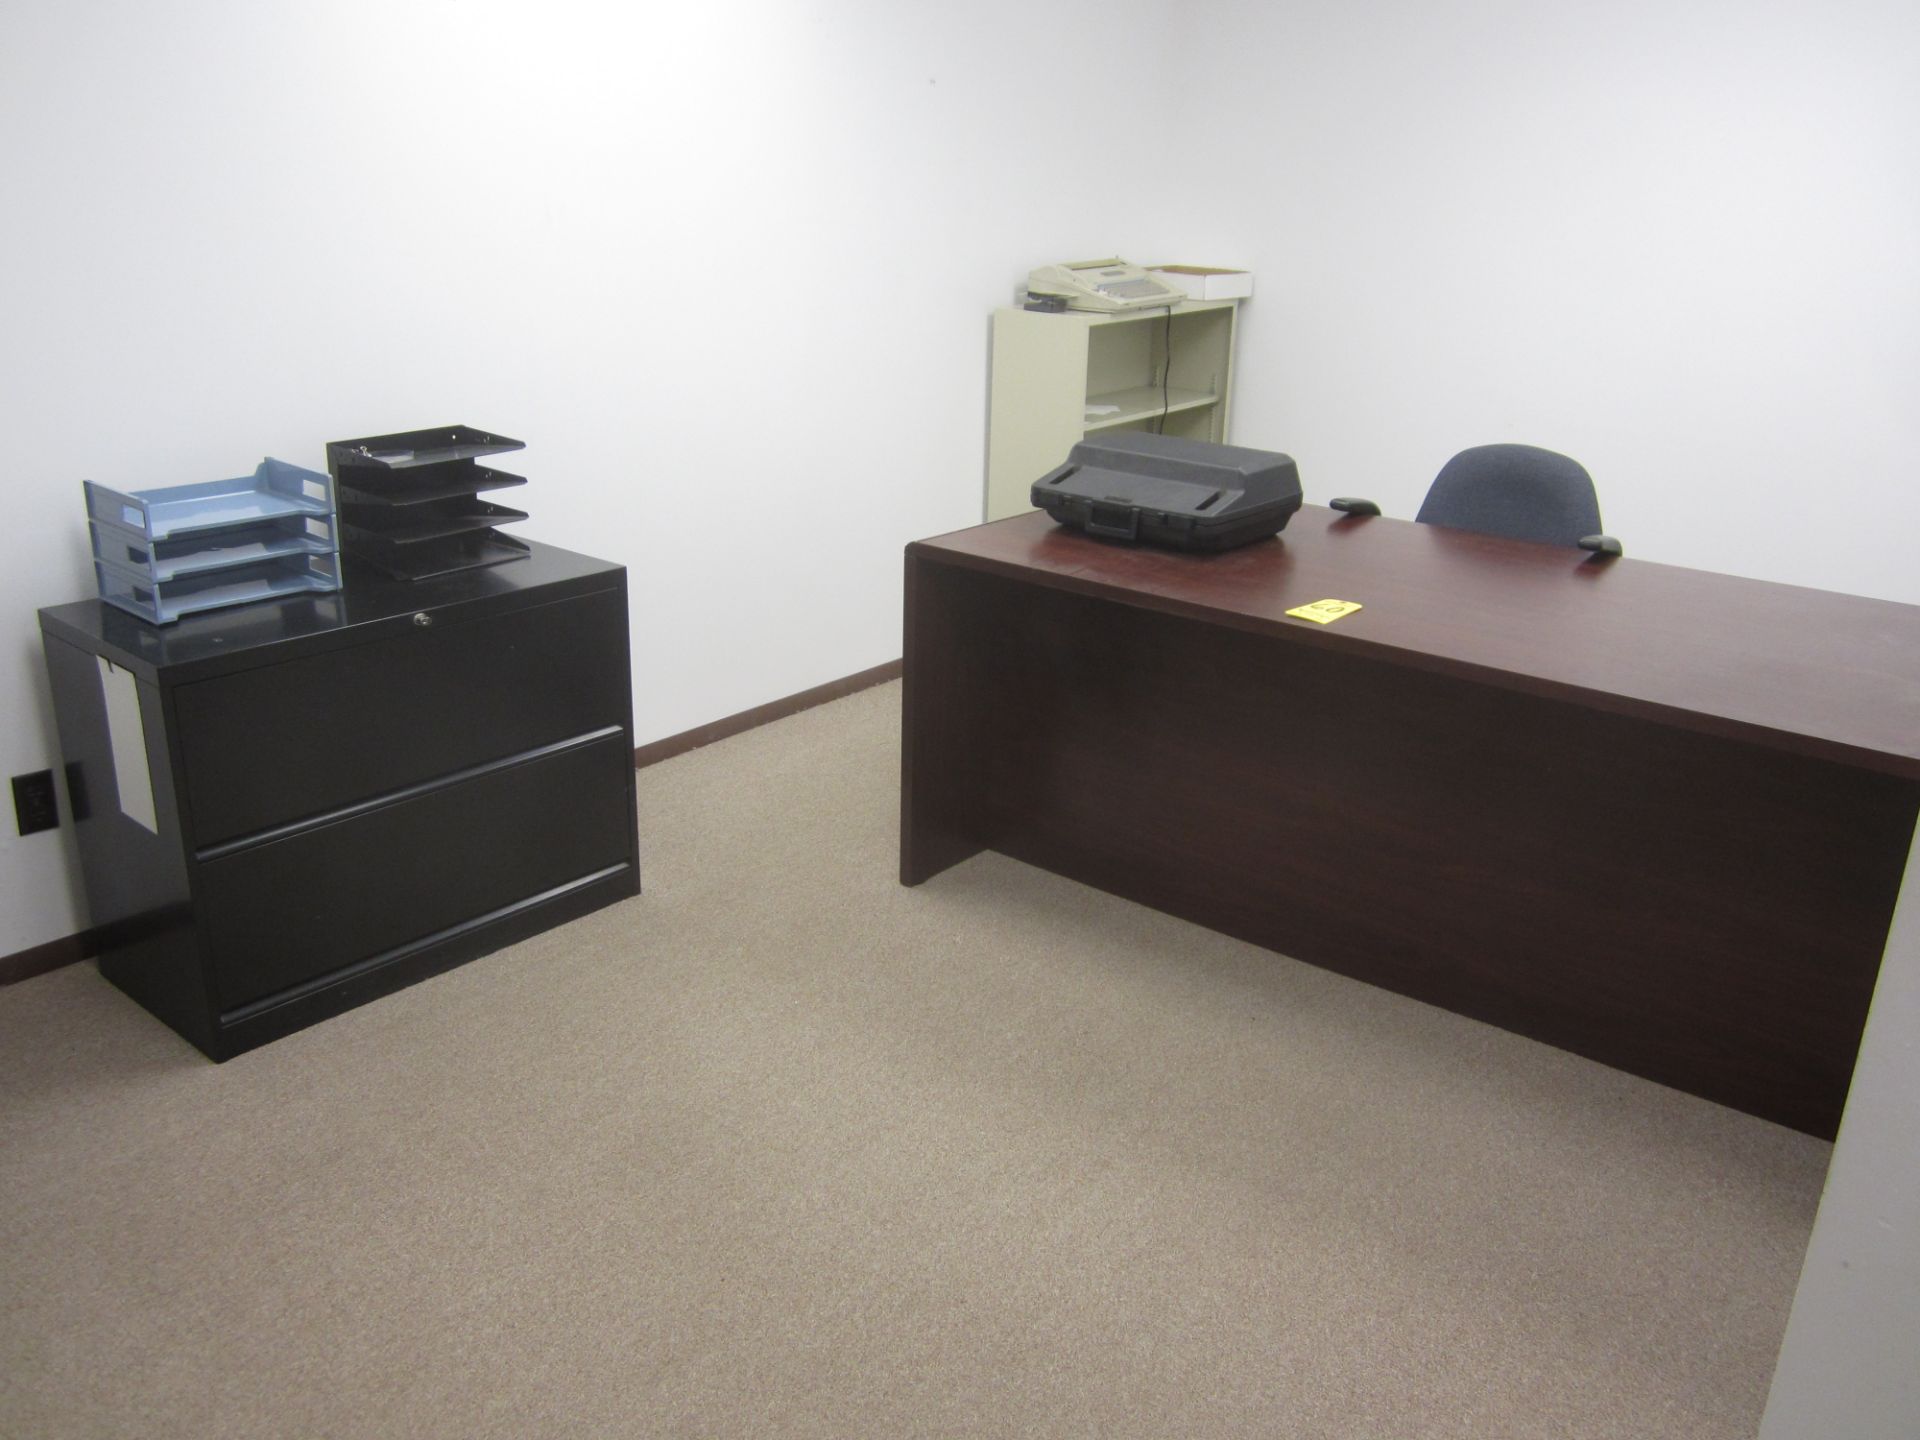 Contents of Office: Desk, Chair, (2) 2-Drawer Lateral Files, Metal Bookshelf, (2) Typewriters